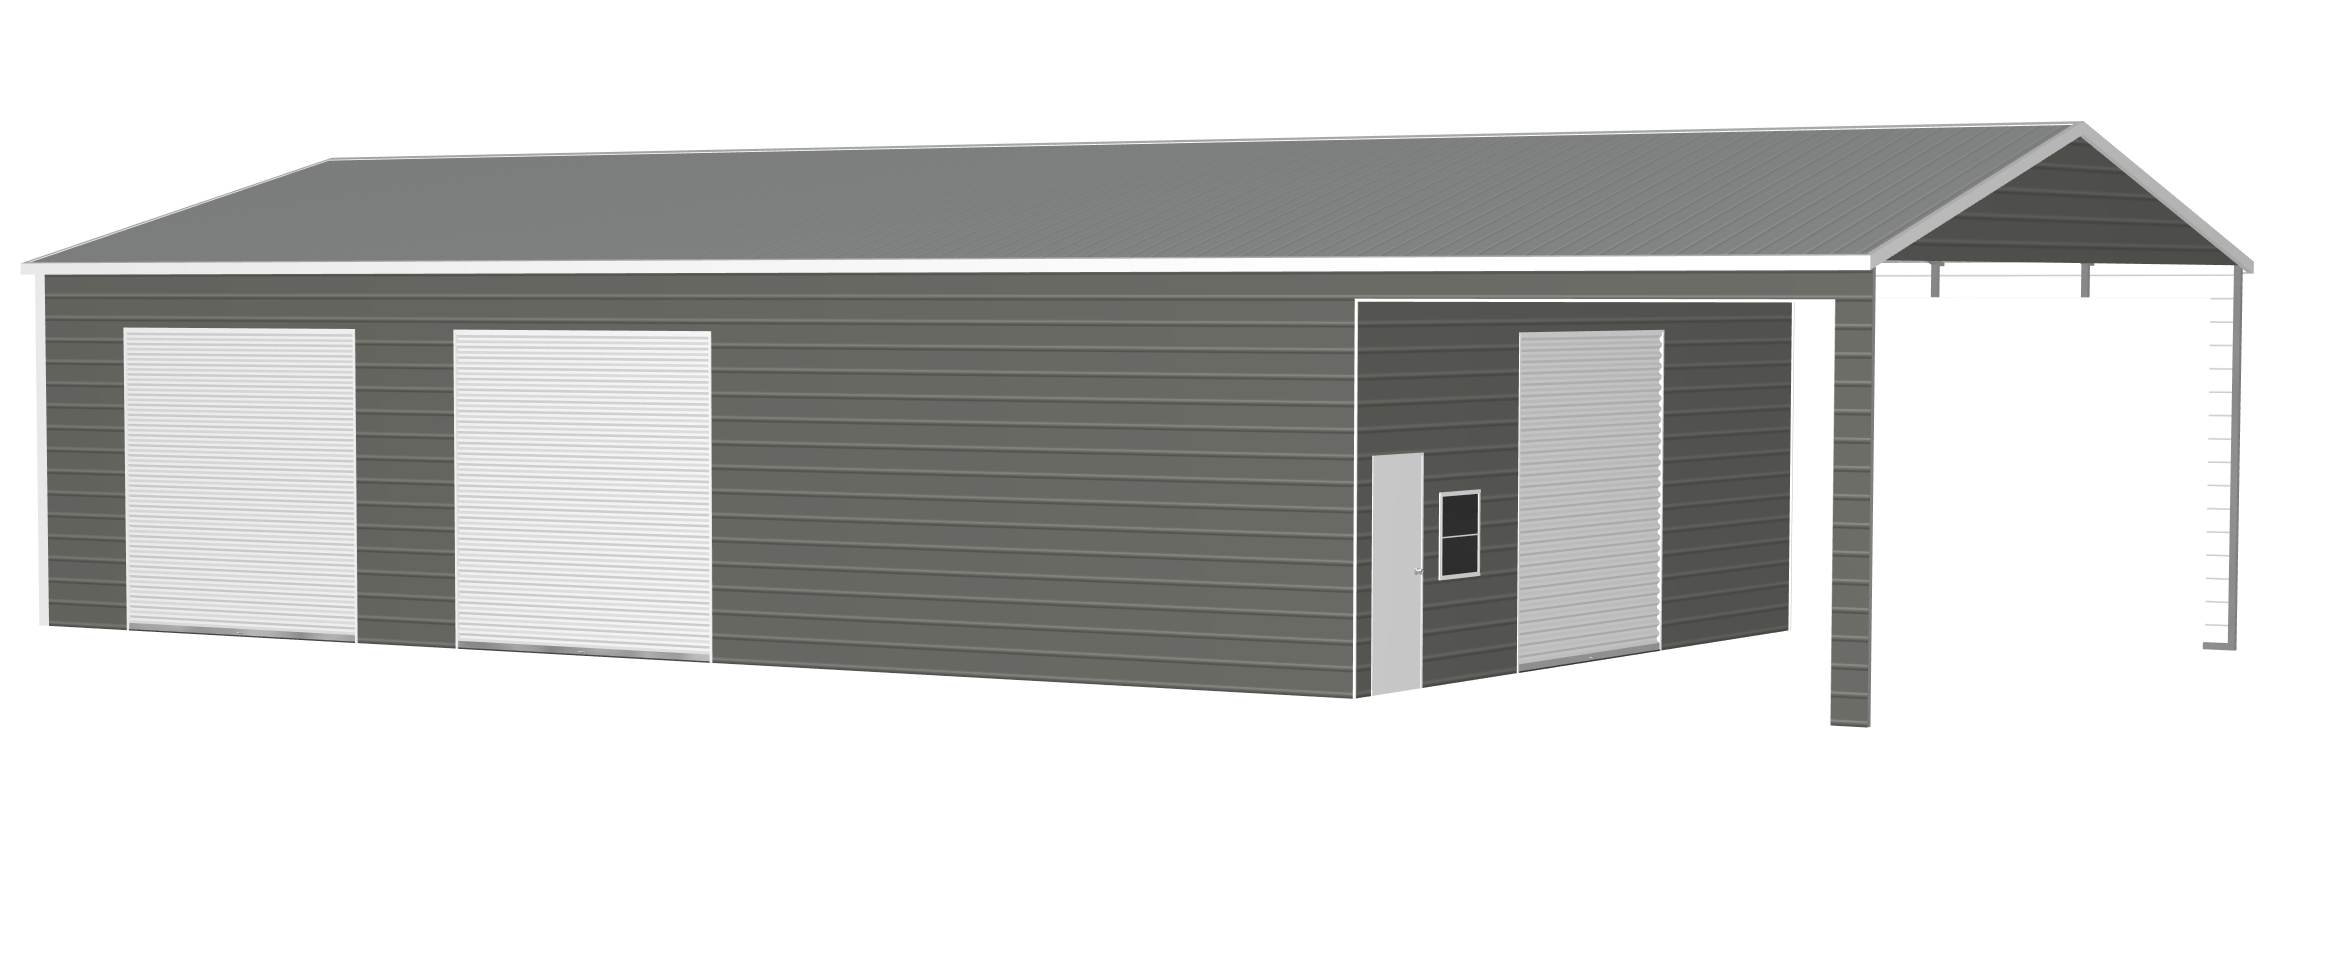 Princeton, NC Portable Buildings: Design Your Own Shed Virtually With This Tool